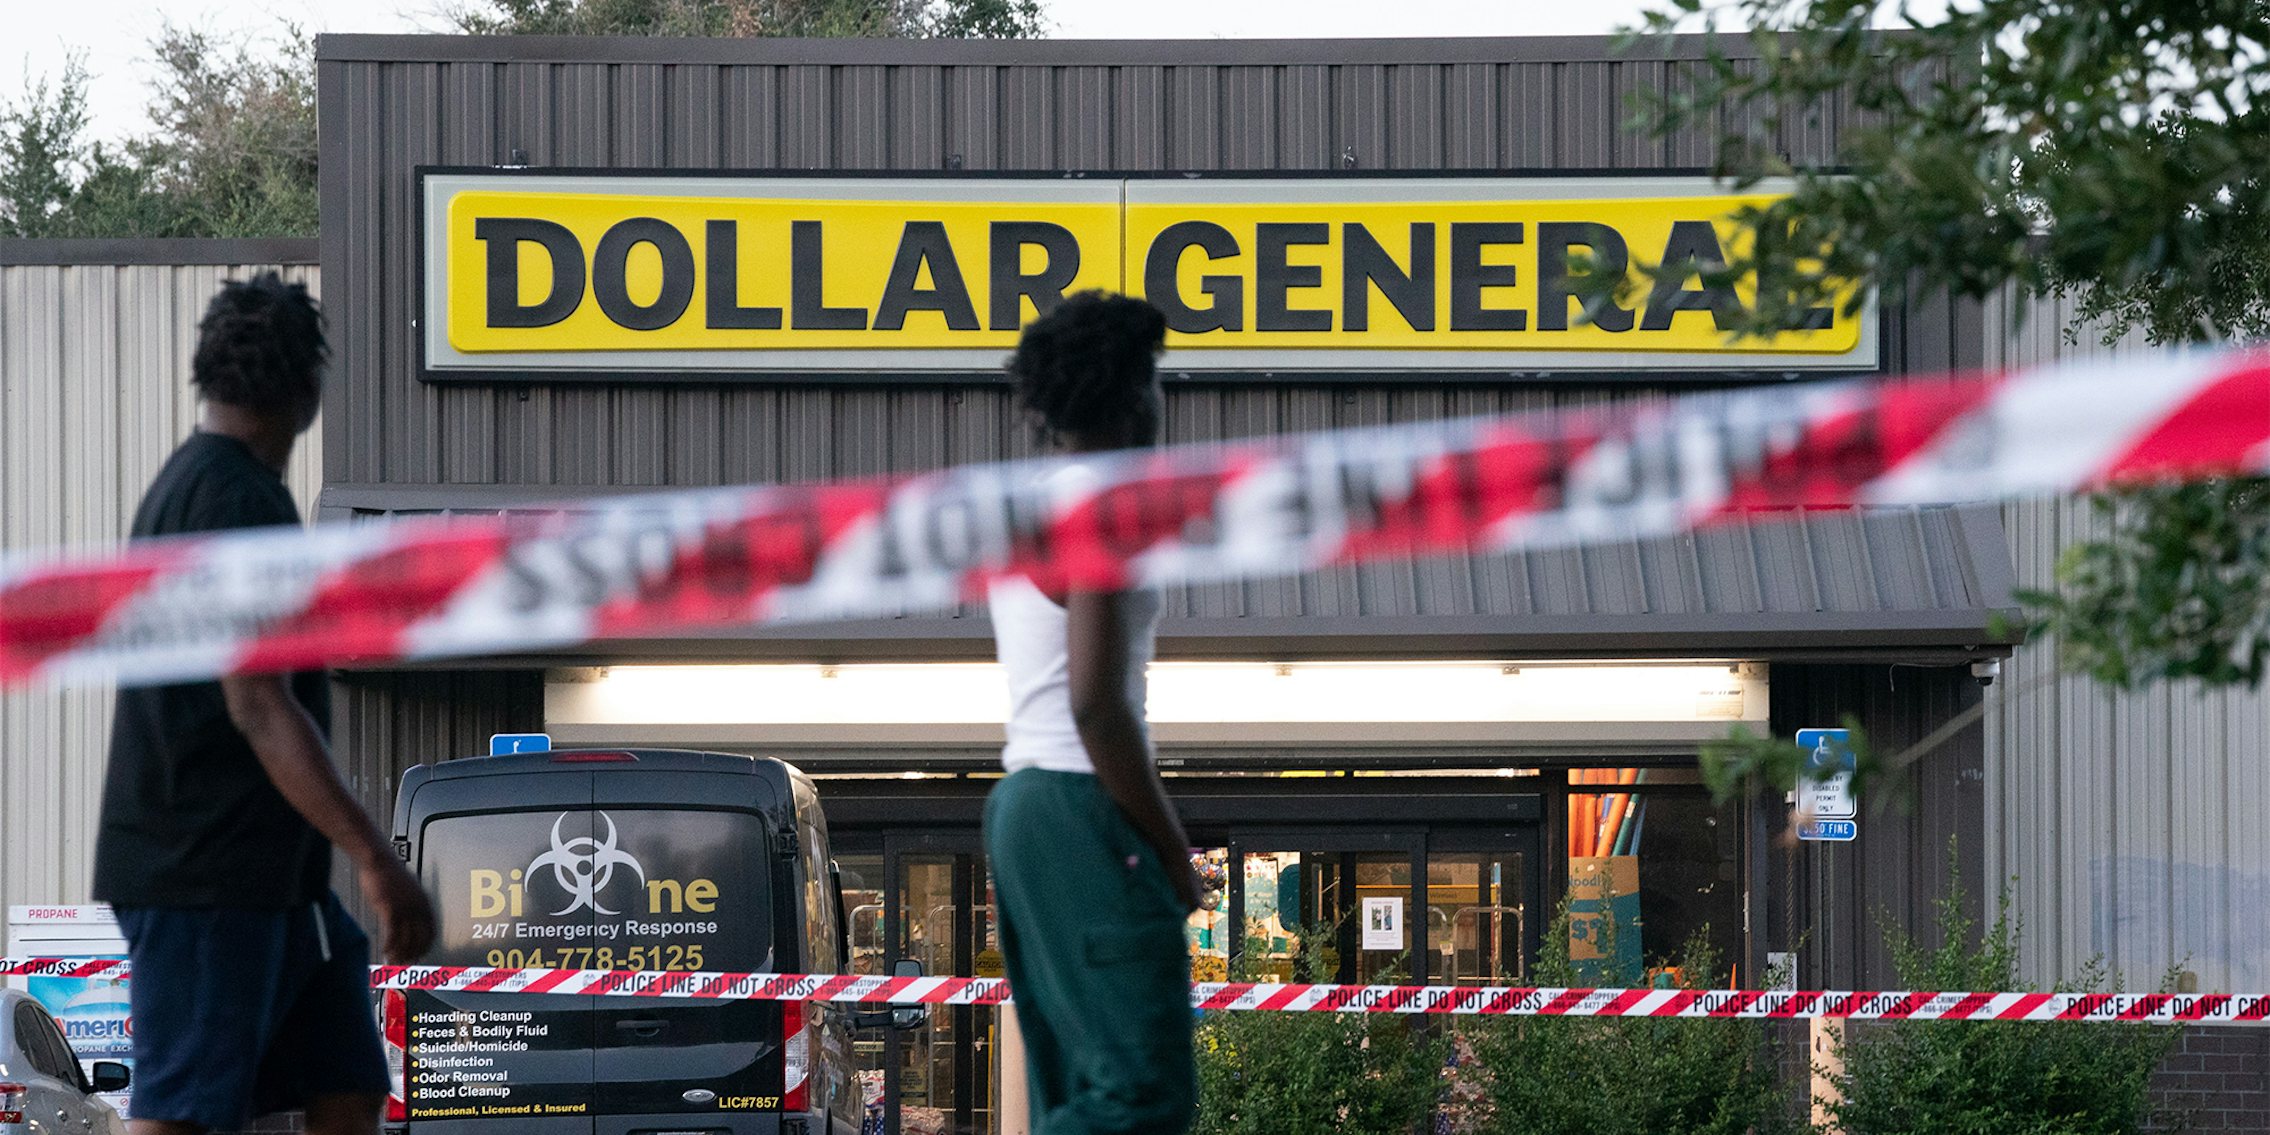 Pedestrians walk past a Dollar General store with police tape around